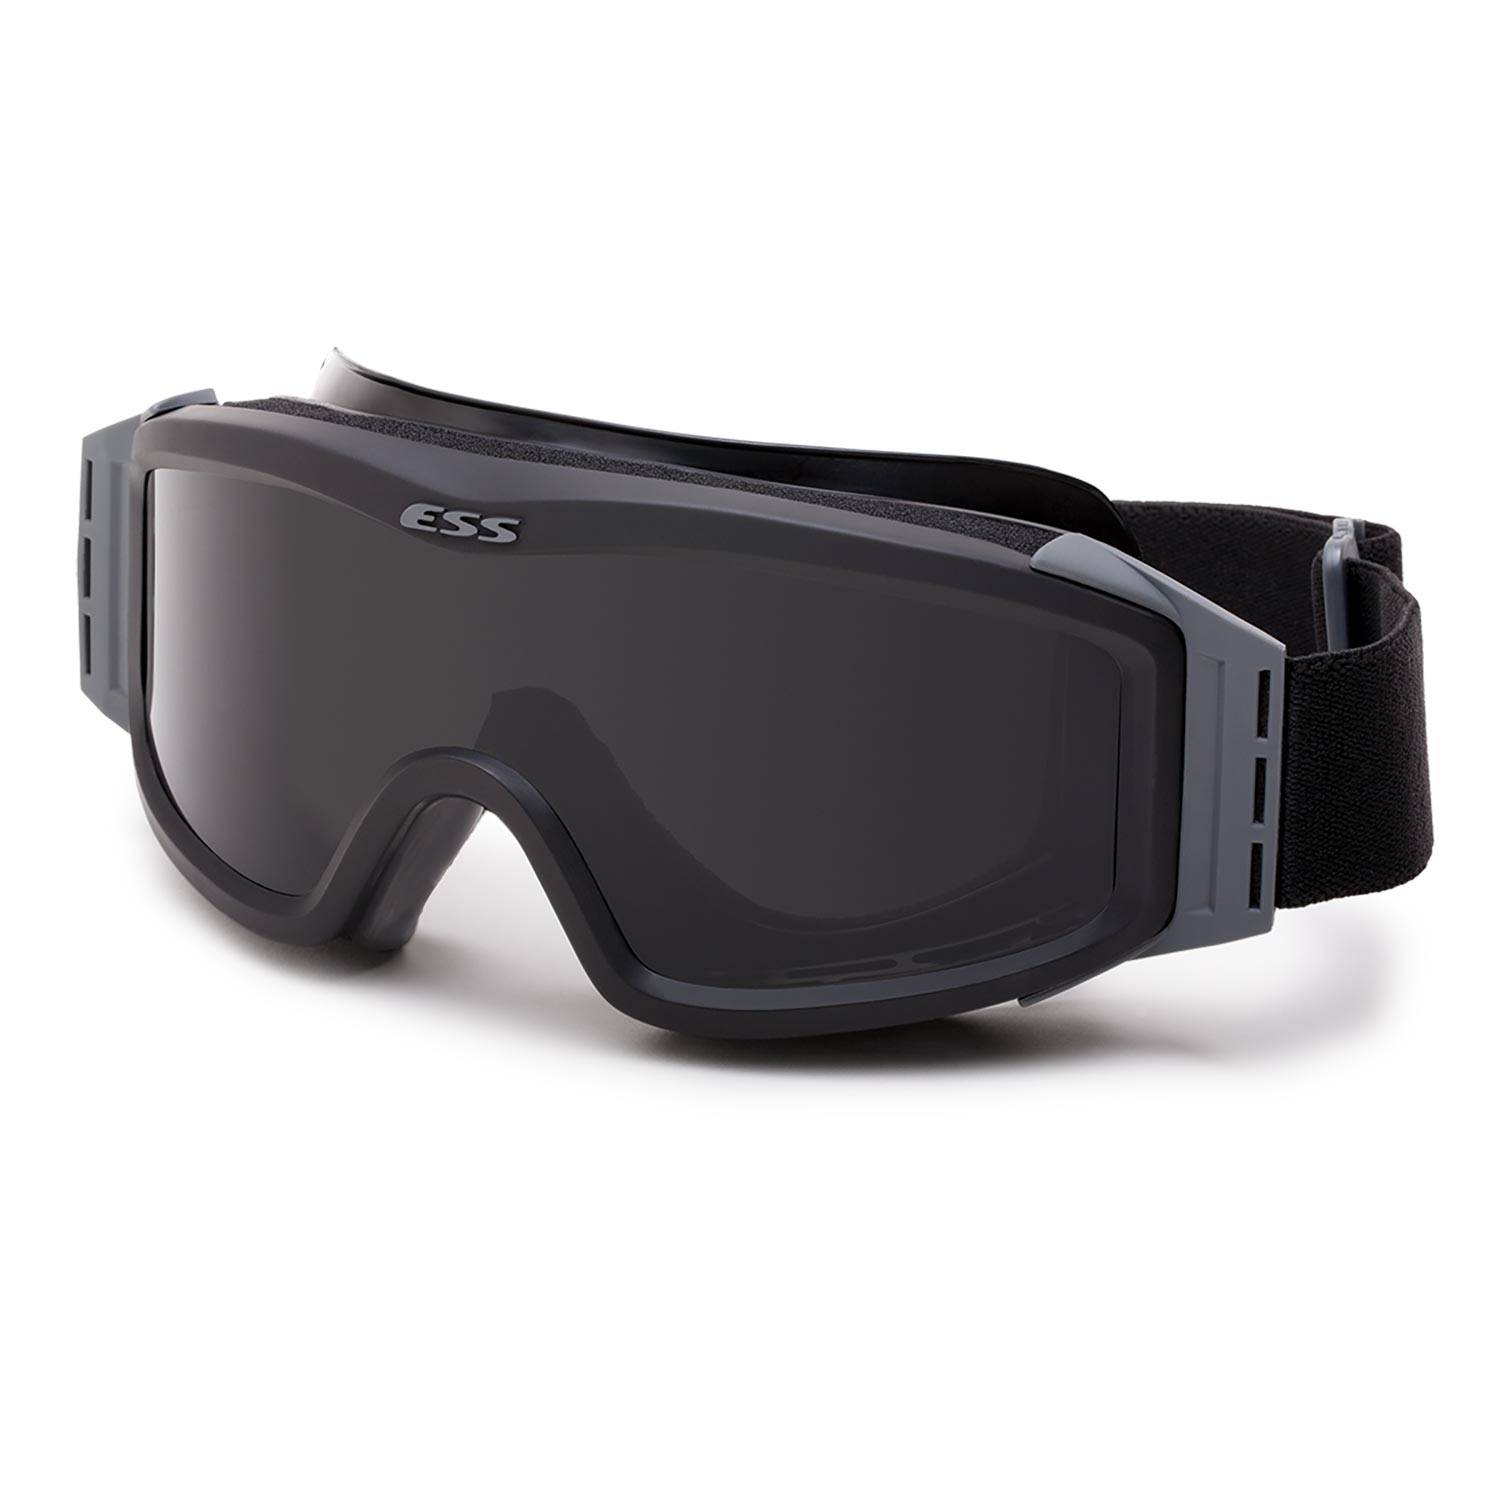 ESS LOW PROFILE NVG TACTICAL GOGGLES